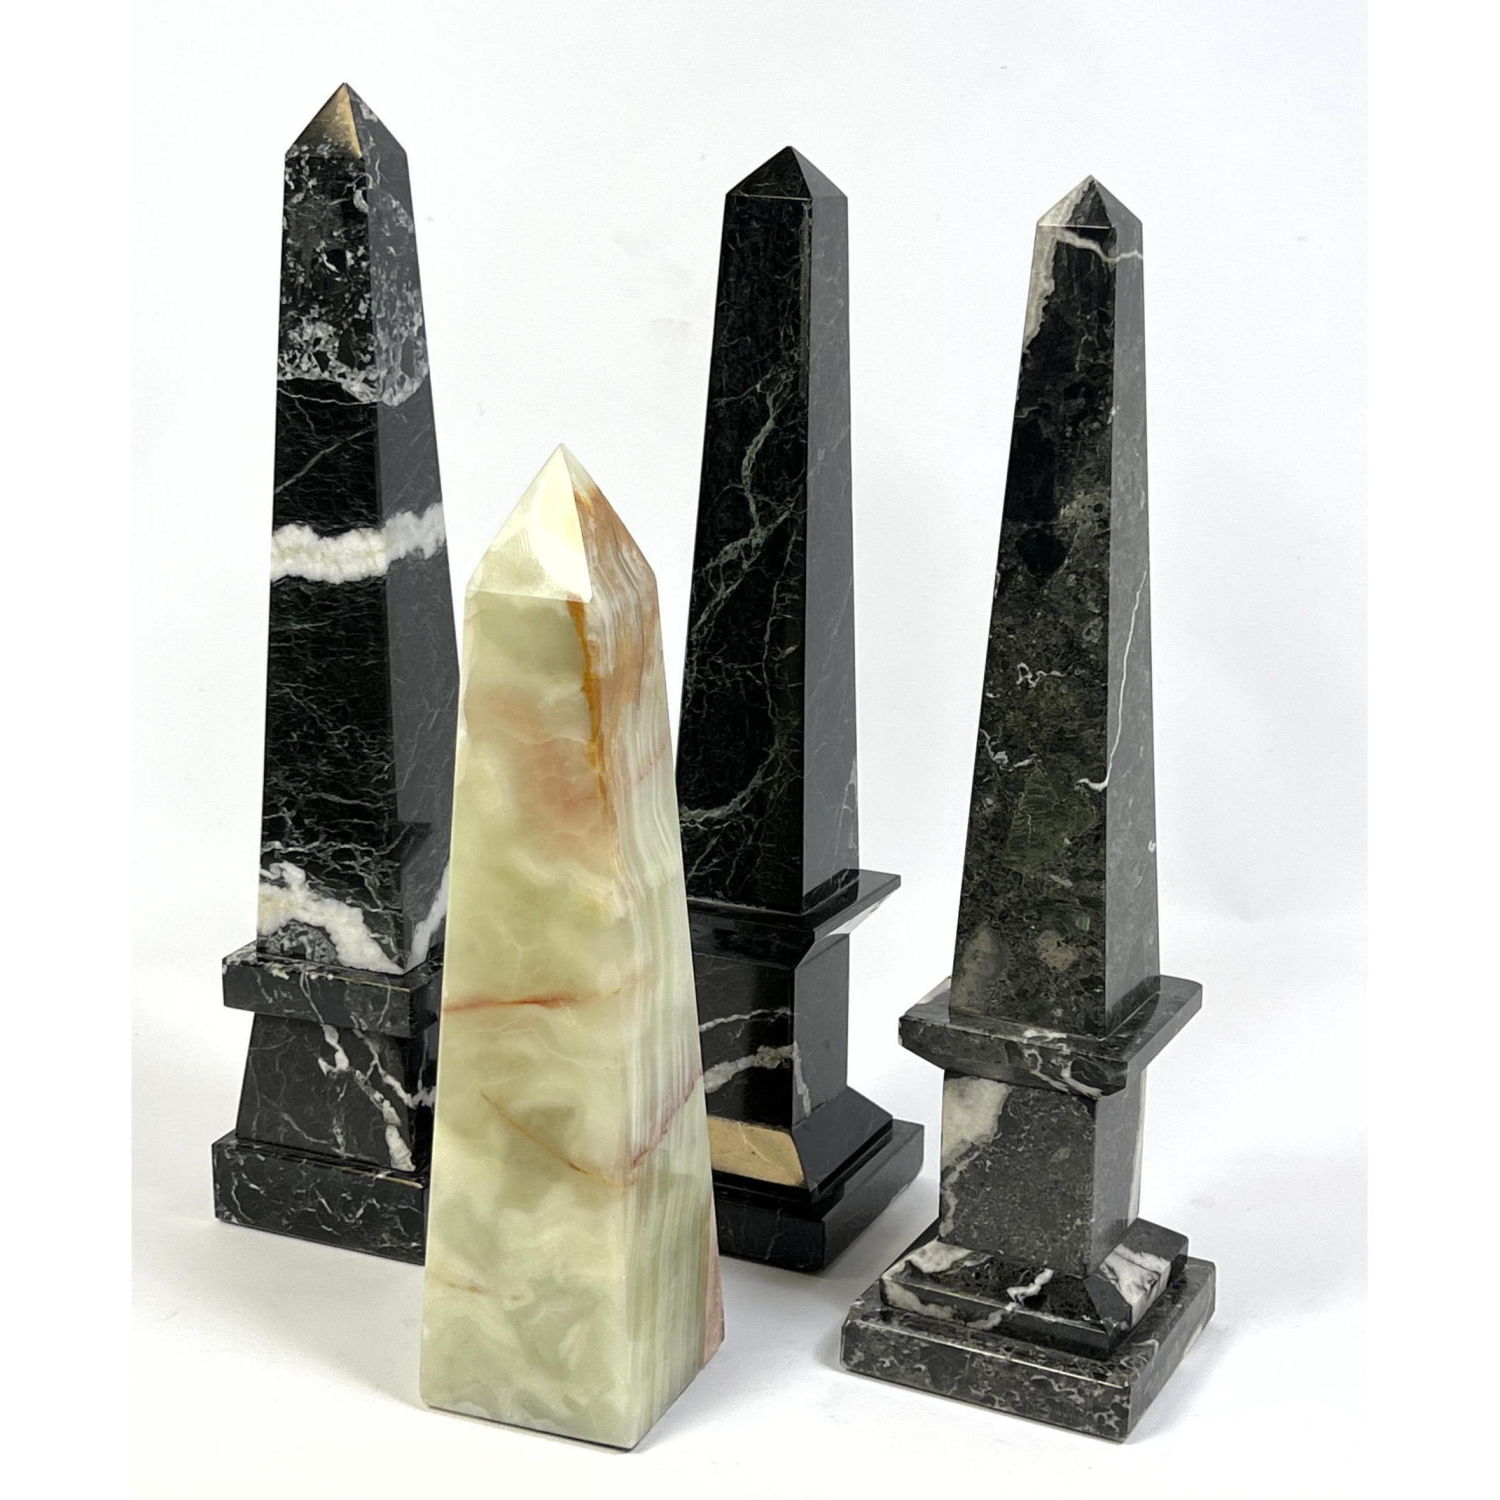 4pc Stone and Marble Obelisk Sculpture 2b89ed